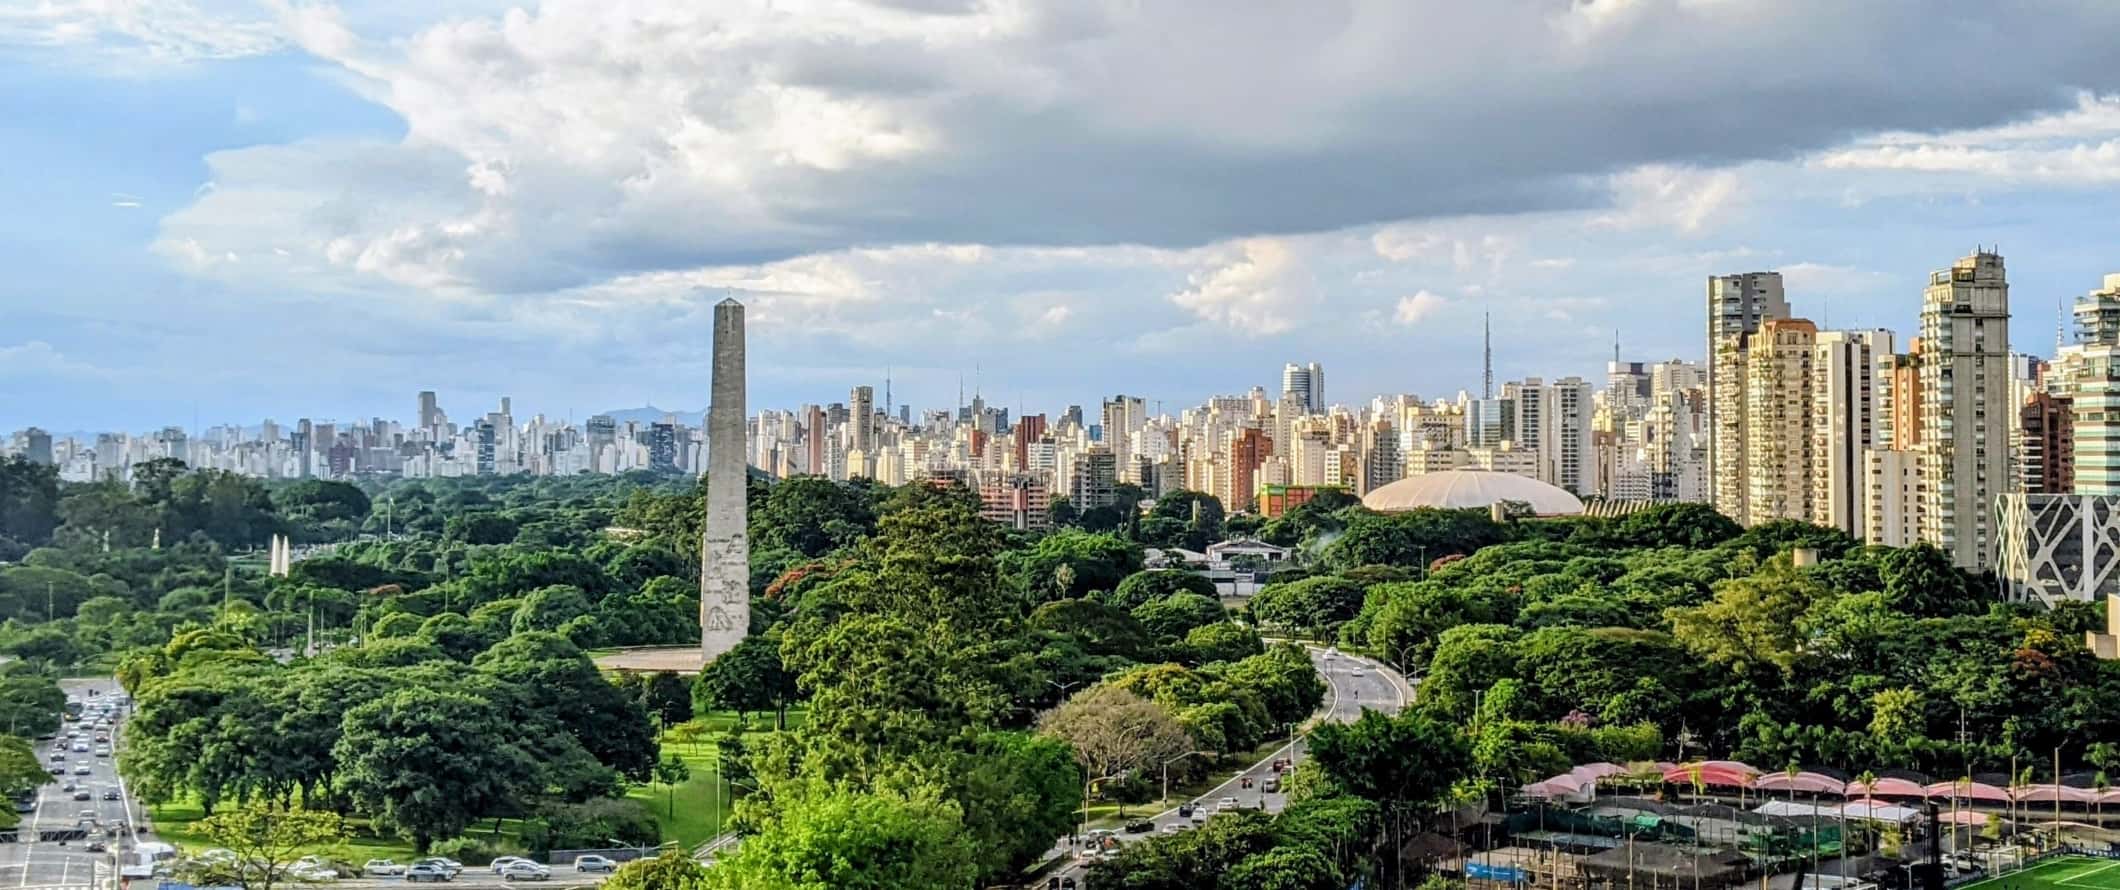 São Paulo ciy skyline with the obelisk and Ibirapuera Park in the foreground and the skyscrapers of the city in the background